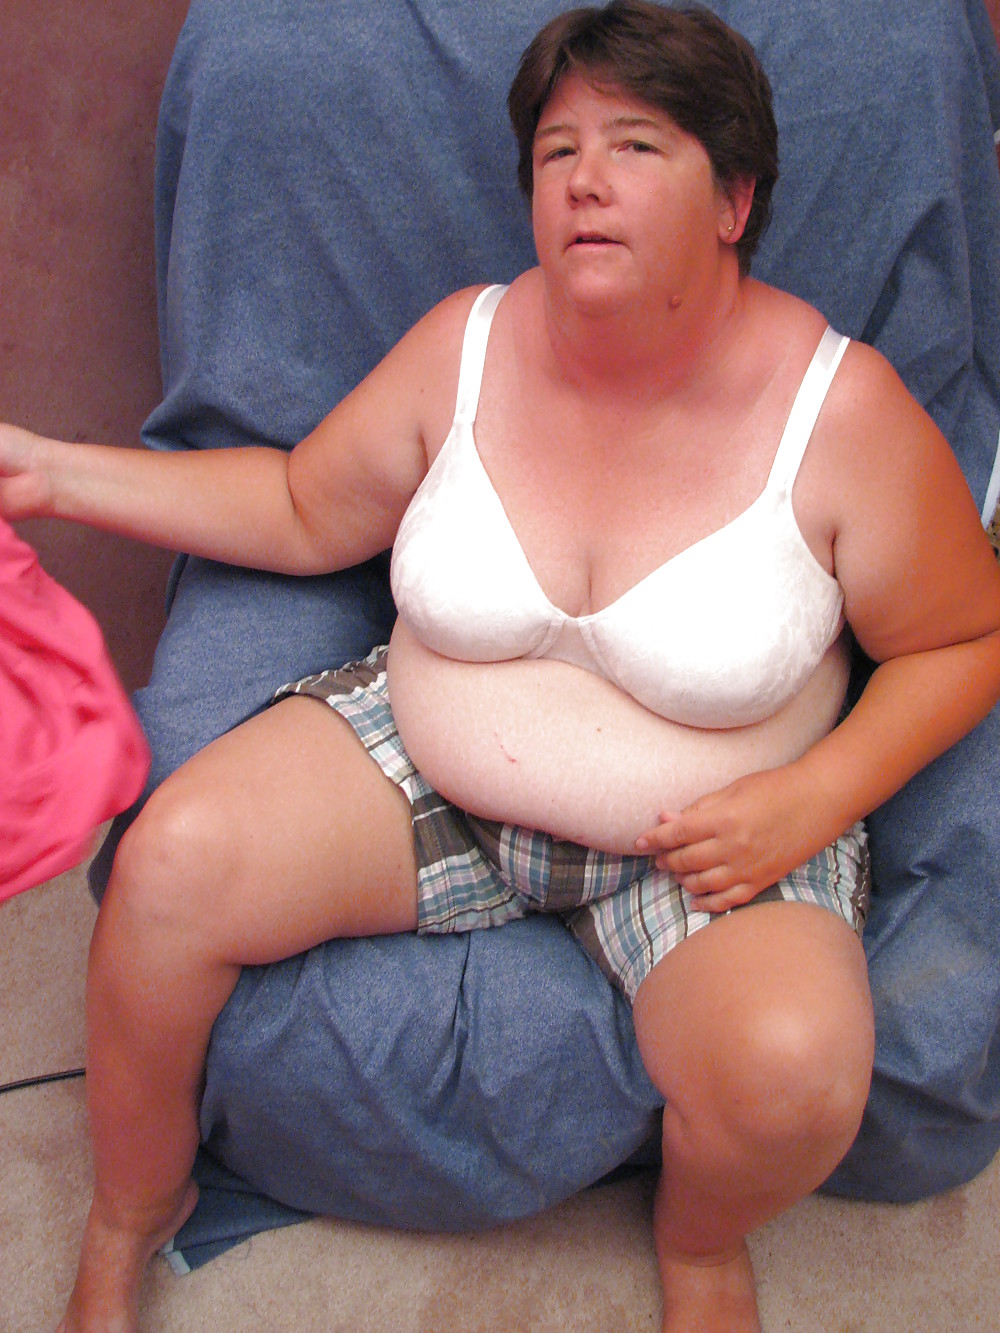 Aunt Maggie shows off her fat cuvy body #4426188